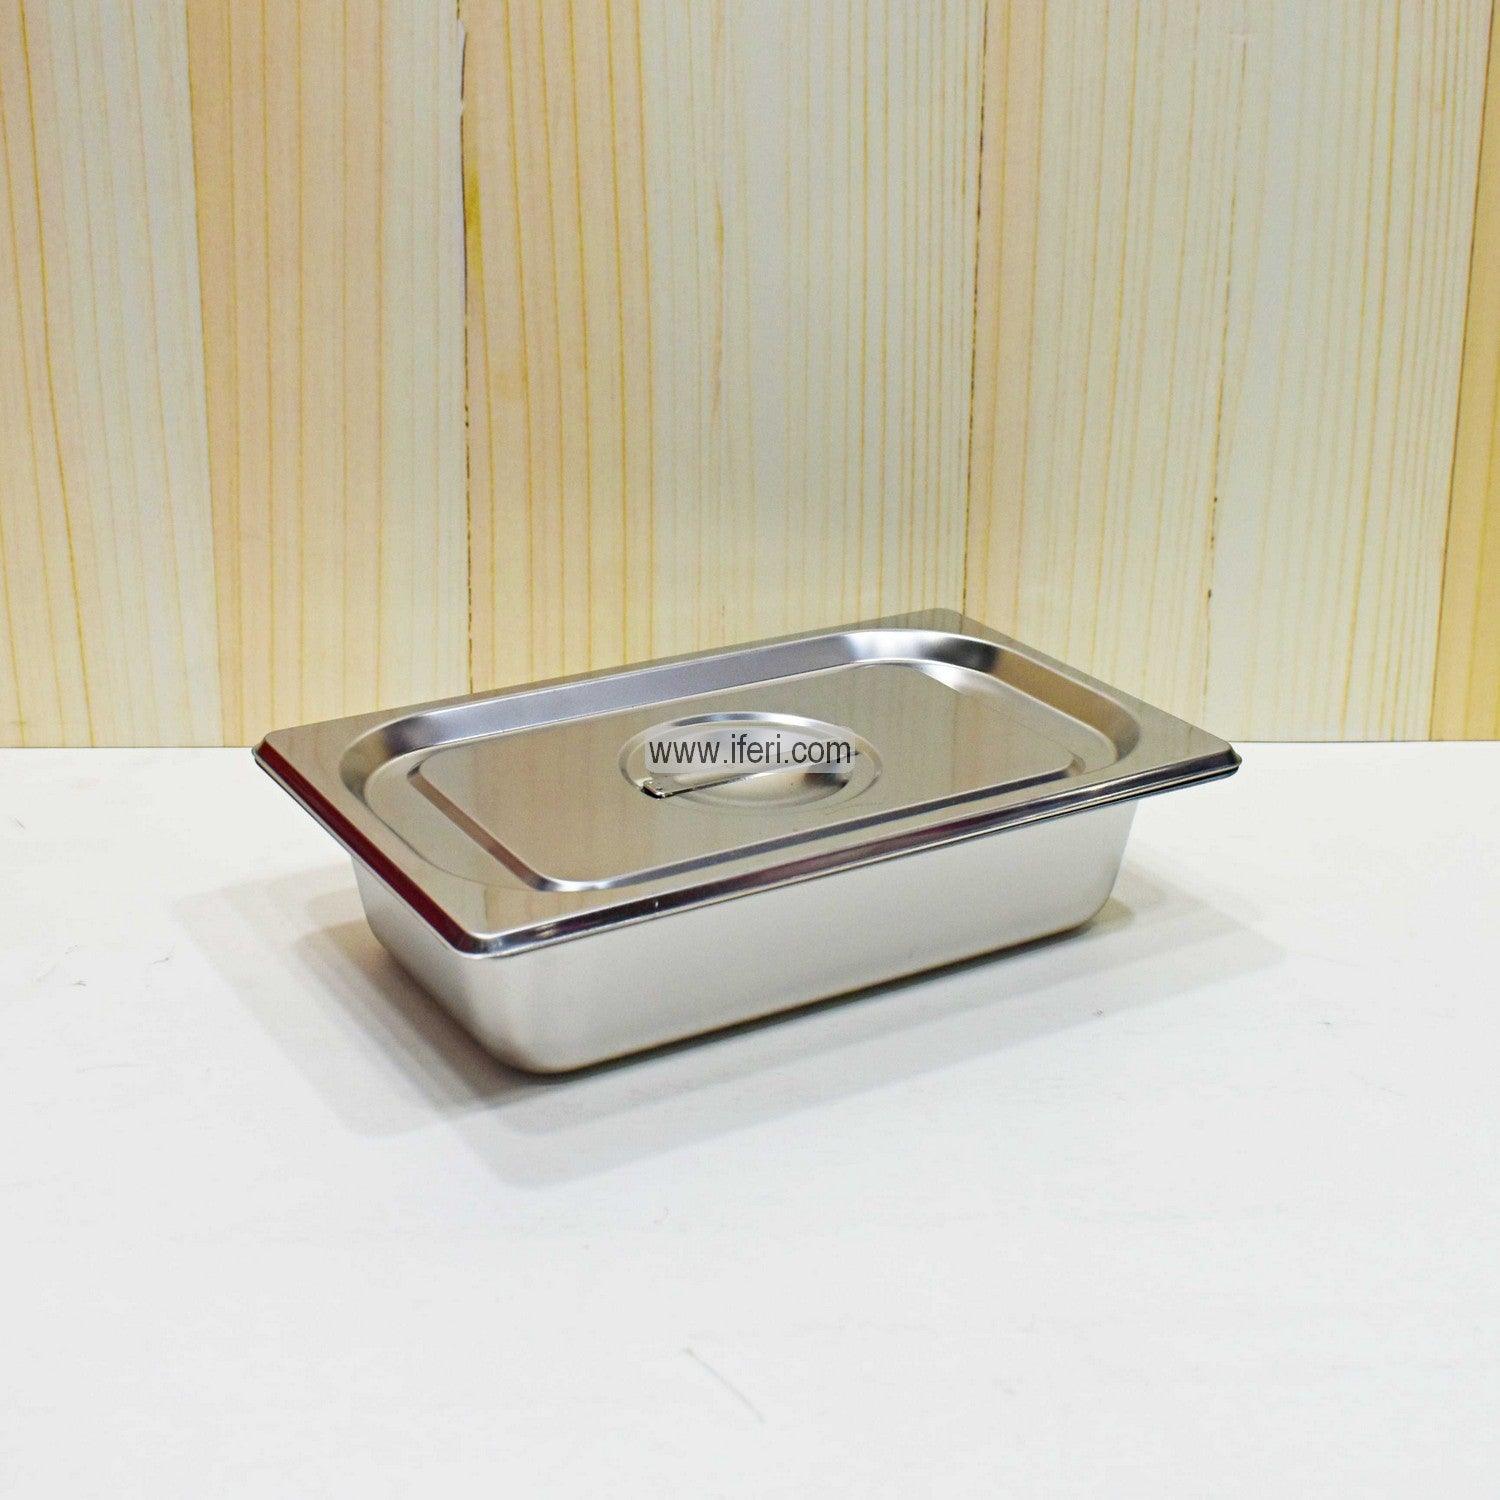 10.5 Inch Stainless Steel Food Pan with Lid SN0577 Price in Bangladesh - iferi.com